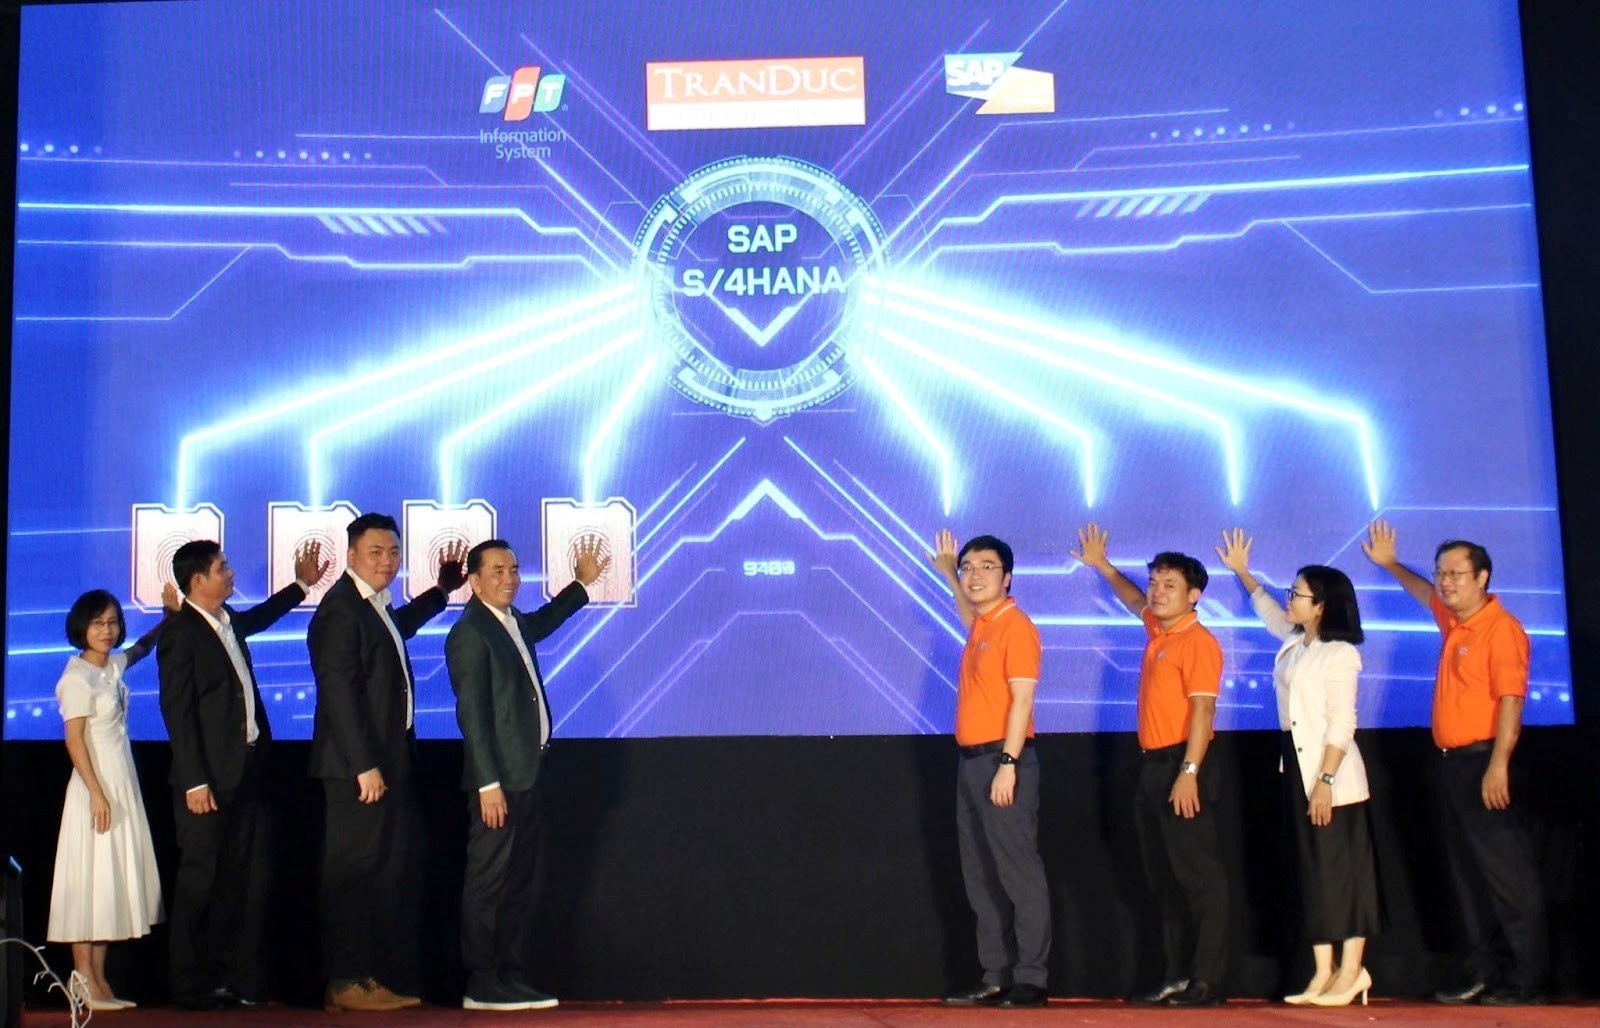 FPT IS and Tran Duc officially implement 'Rise with SAP' solution